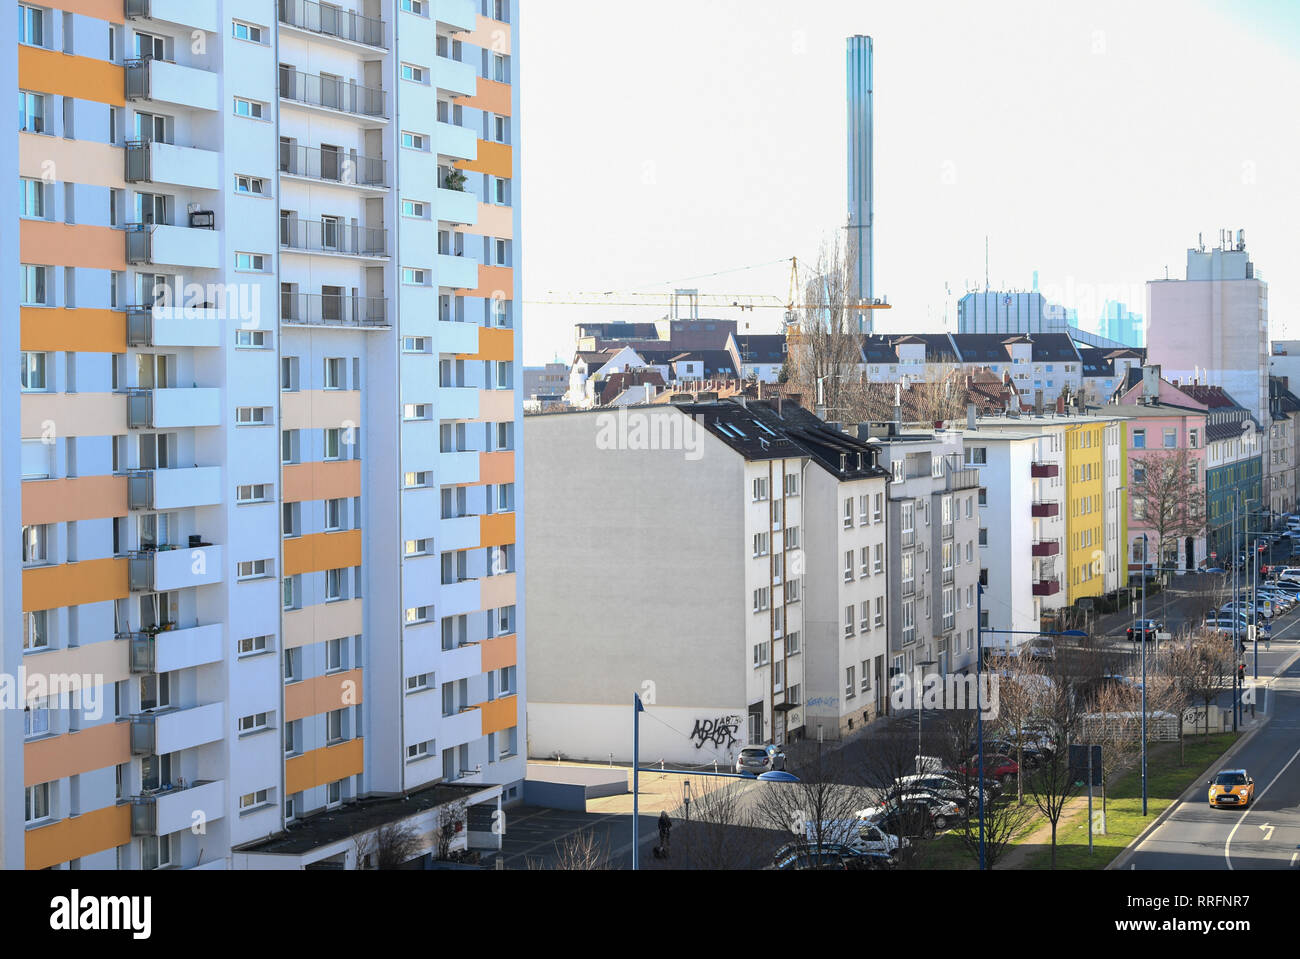 25 February 2019, Hessen, Offenbach/Main: View on a row of houses at the Offenbacher Nordring. The municipality plans to raise the property tax by almost 400 points to almost 1000. The planned tax rate would thus be by far the highest in the larger Hessian cities. Citizens have announced resistance to the increase. (to dpa 'Massive tax increase in Offenbach - federation demands savings' of 26.02.2019) Photo: Arne Dedert/dpa Stock Photo